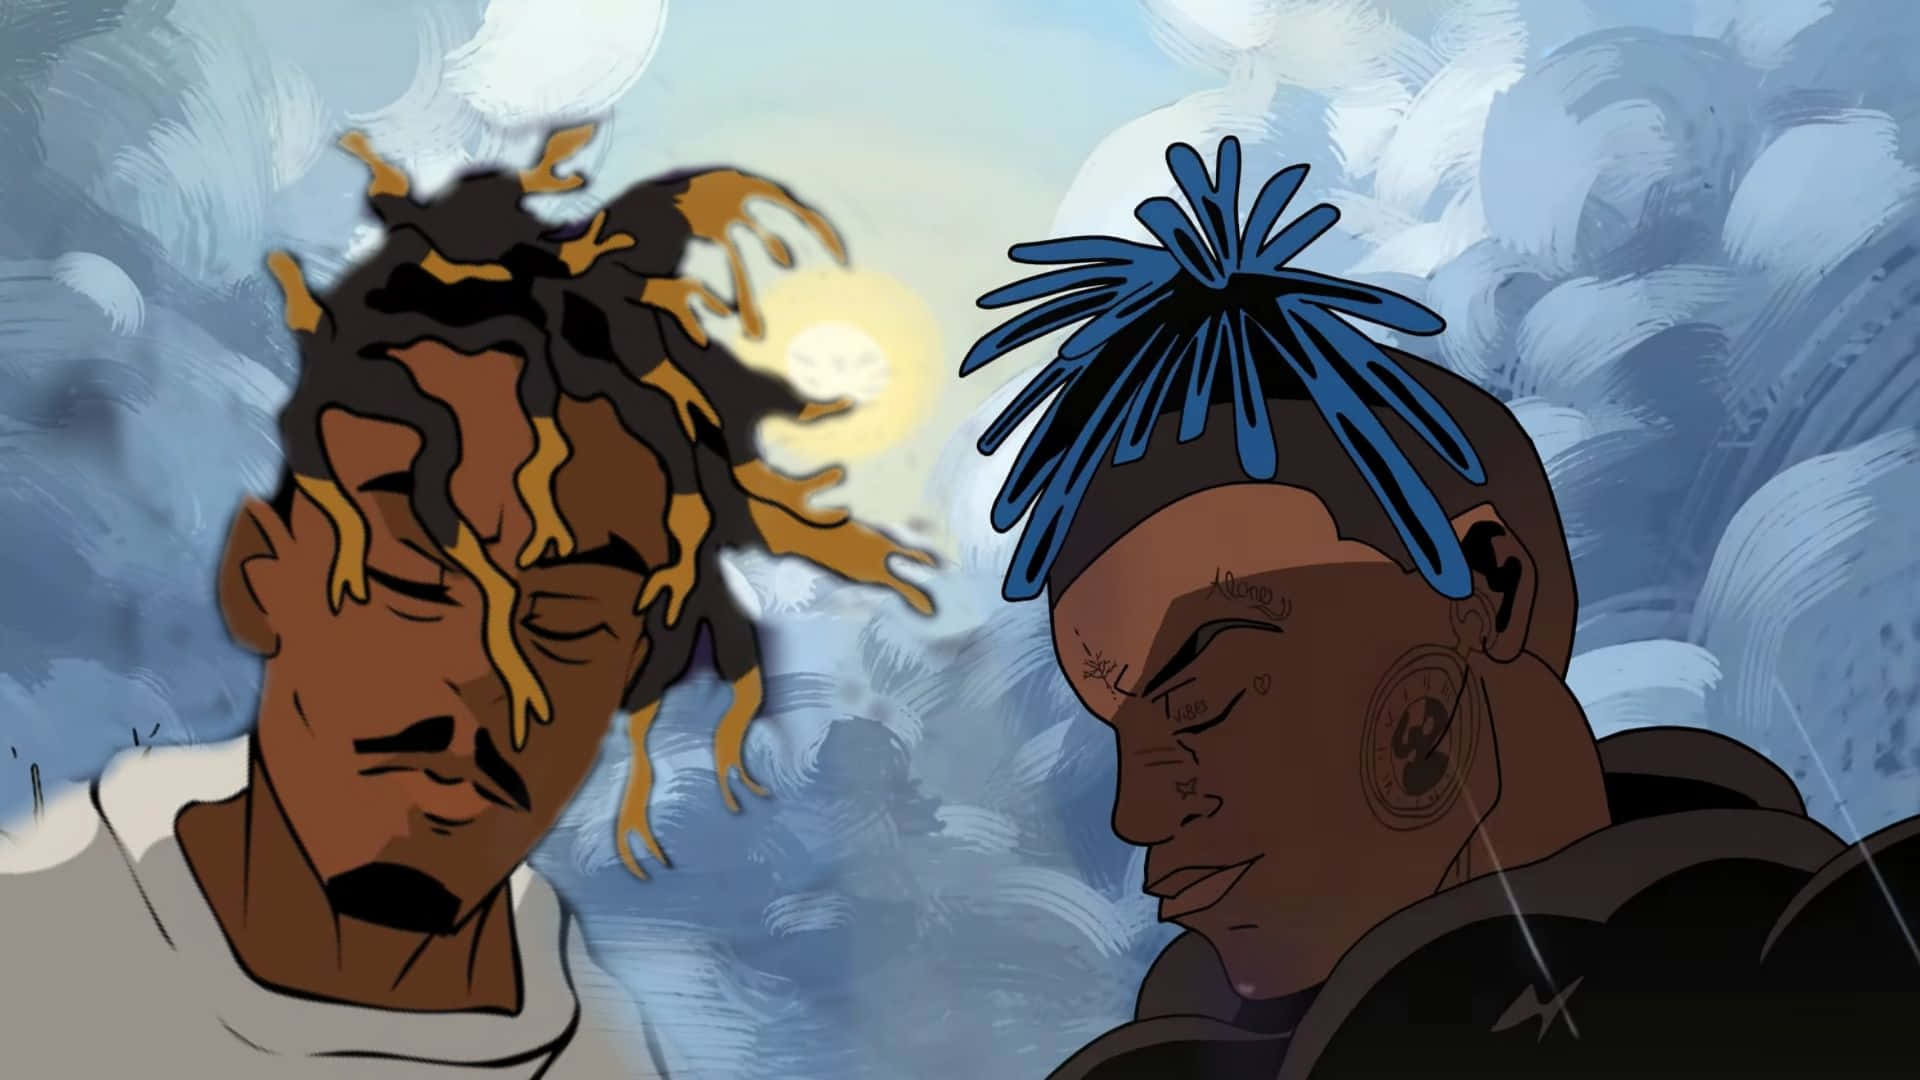 Xxxtentacion And Juice Wrld, Two Of The Biggest Names In Rap. Background